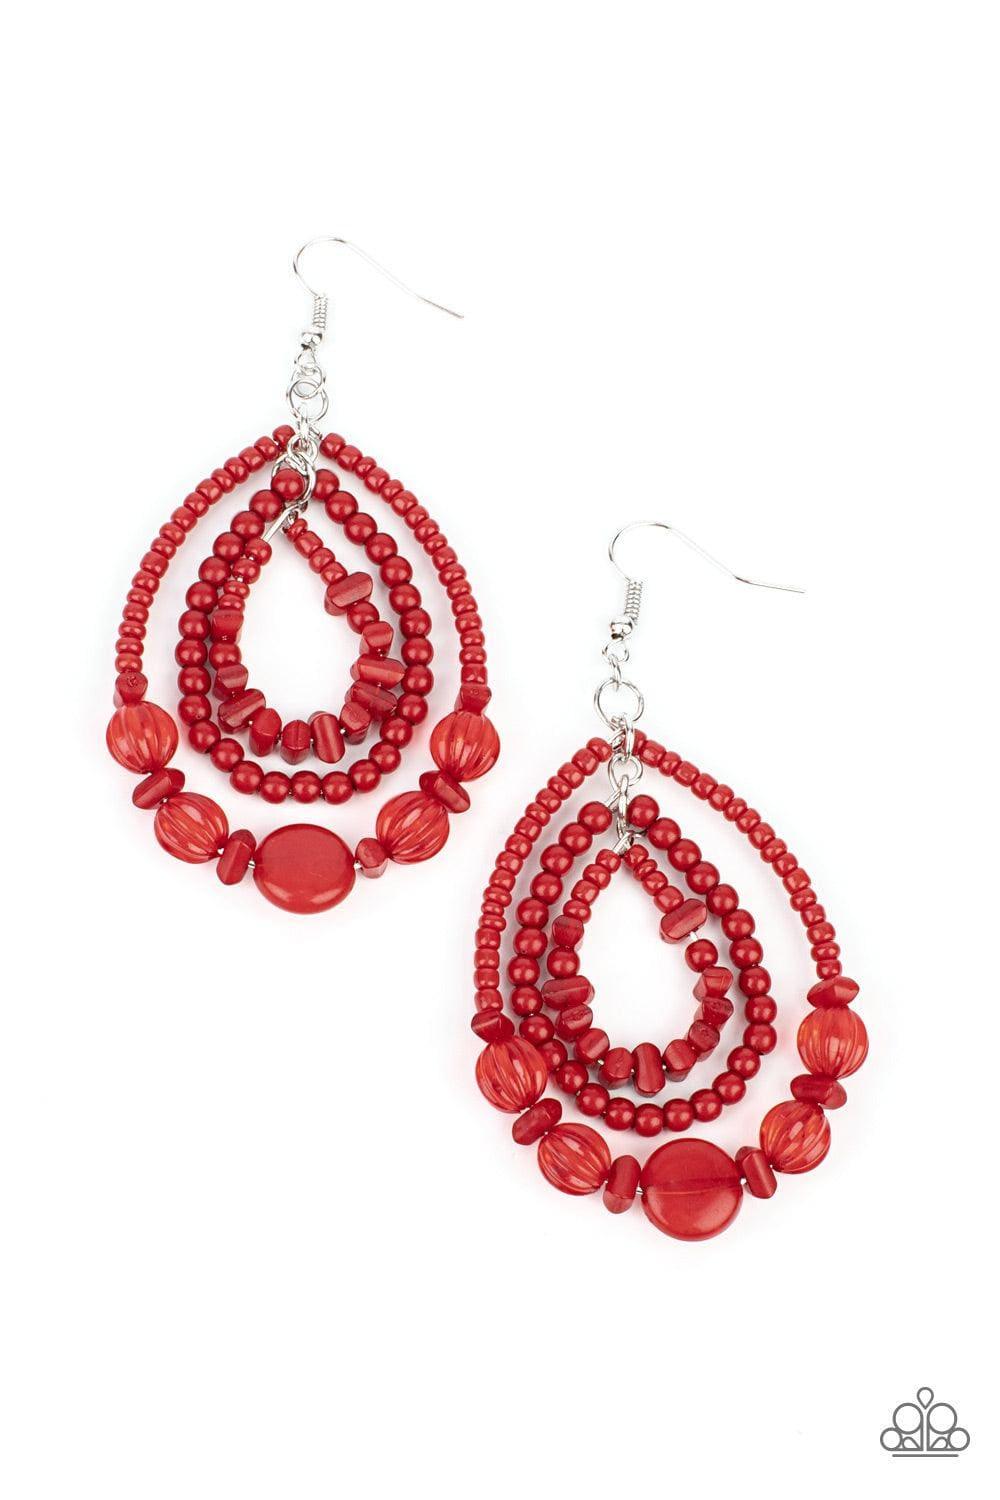 Paparazzi Accessories - Prana Party - Red Earrings - Bling by JessieK